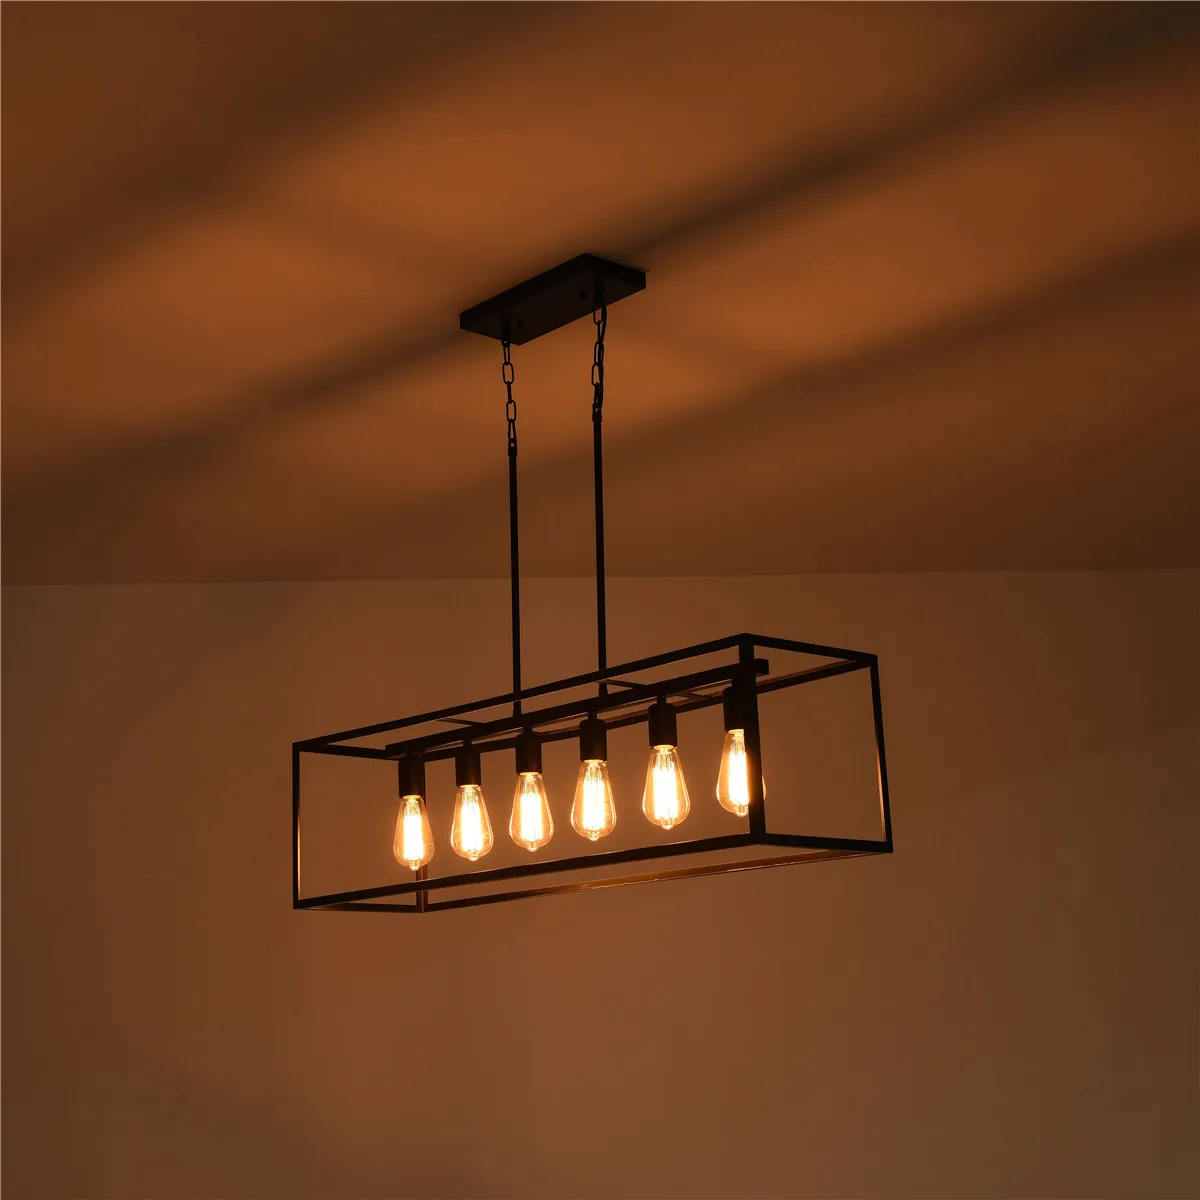 

Ceiling chandelier new movable adjustable chain can be used for home kitchen bedroom dining room